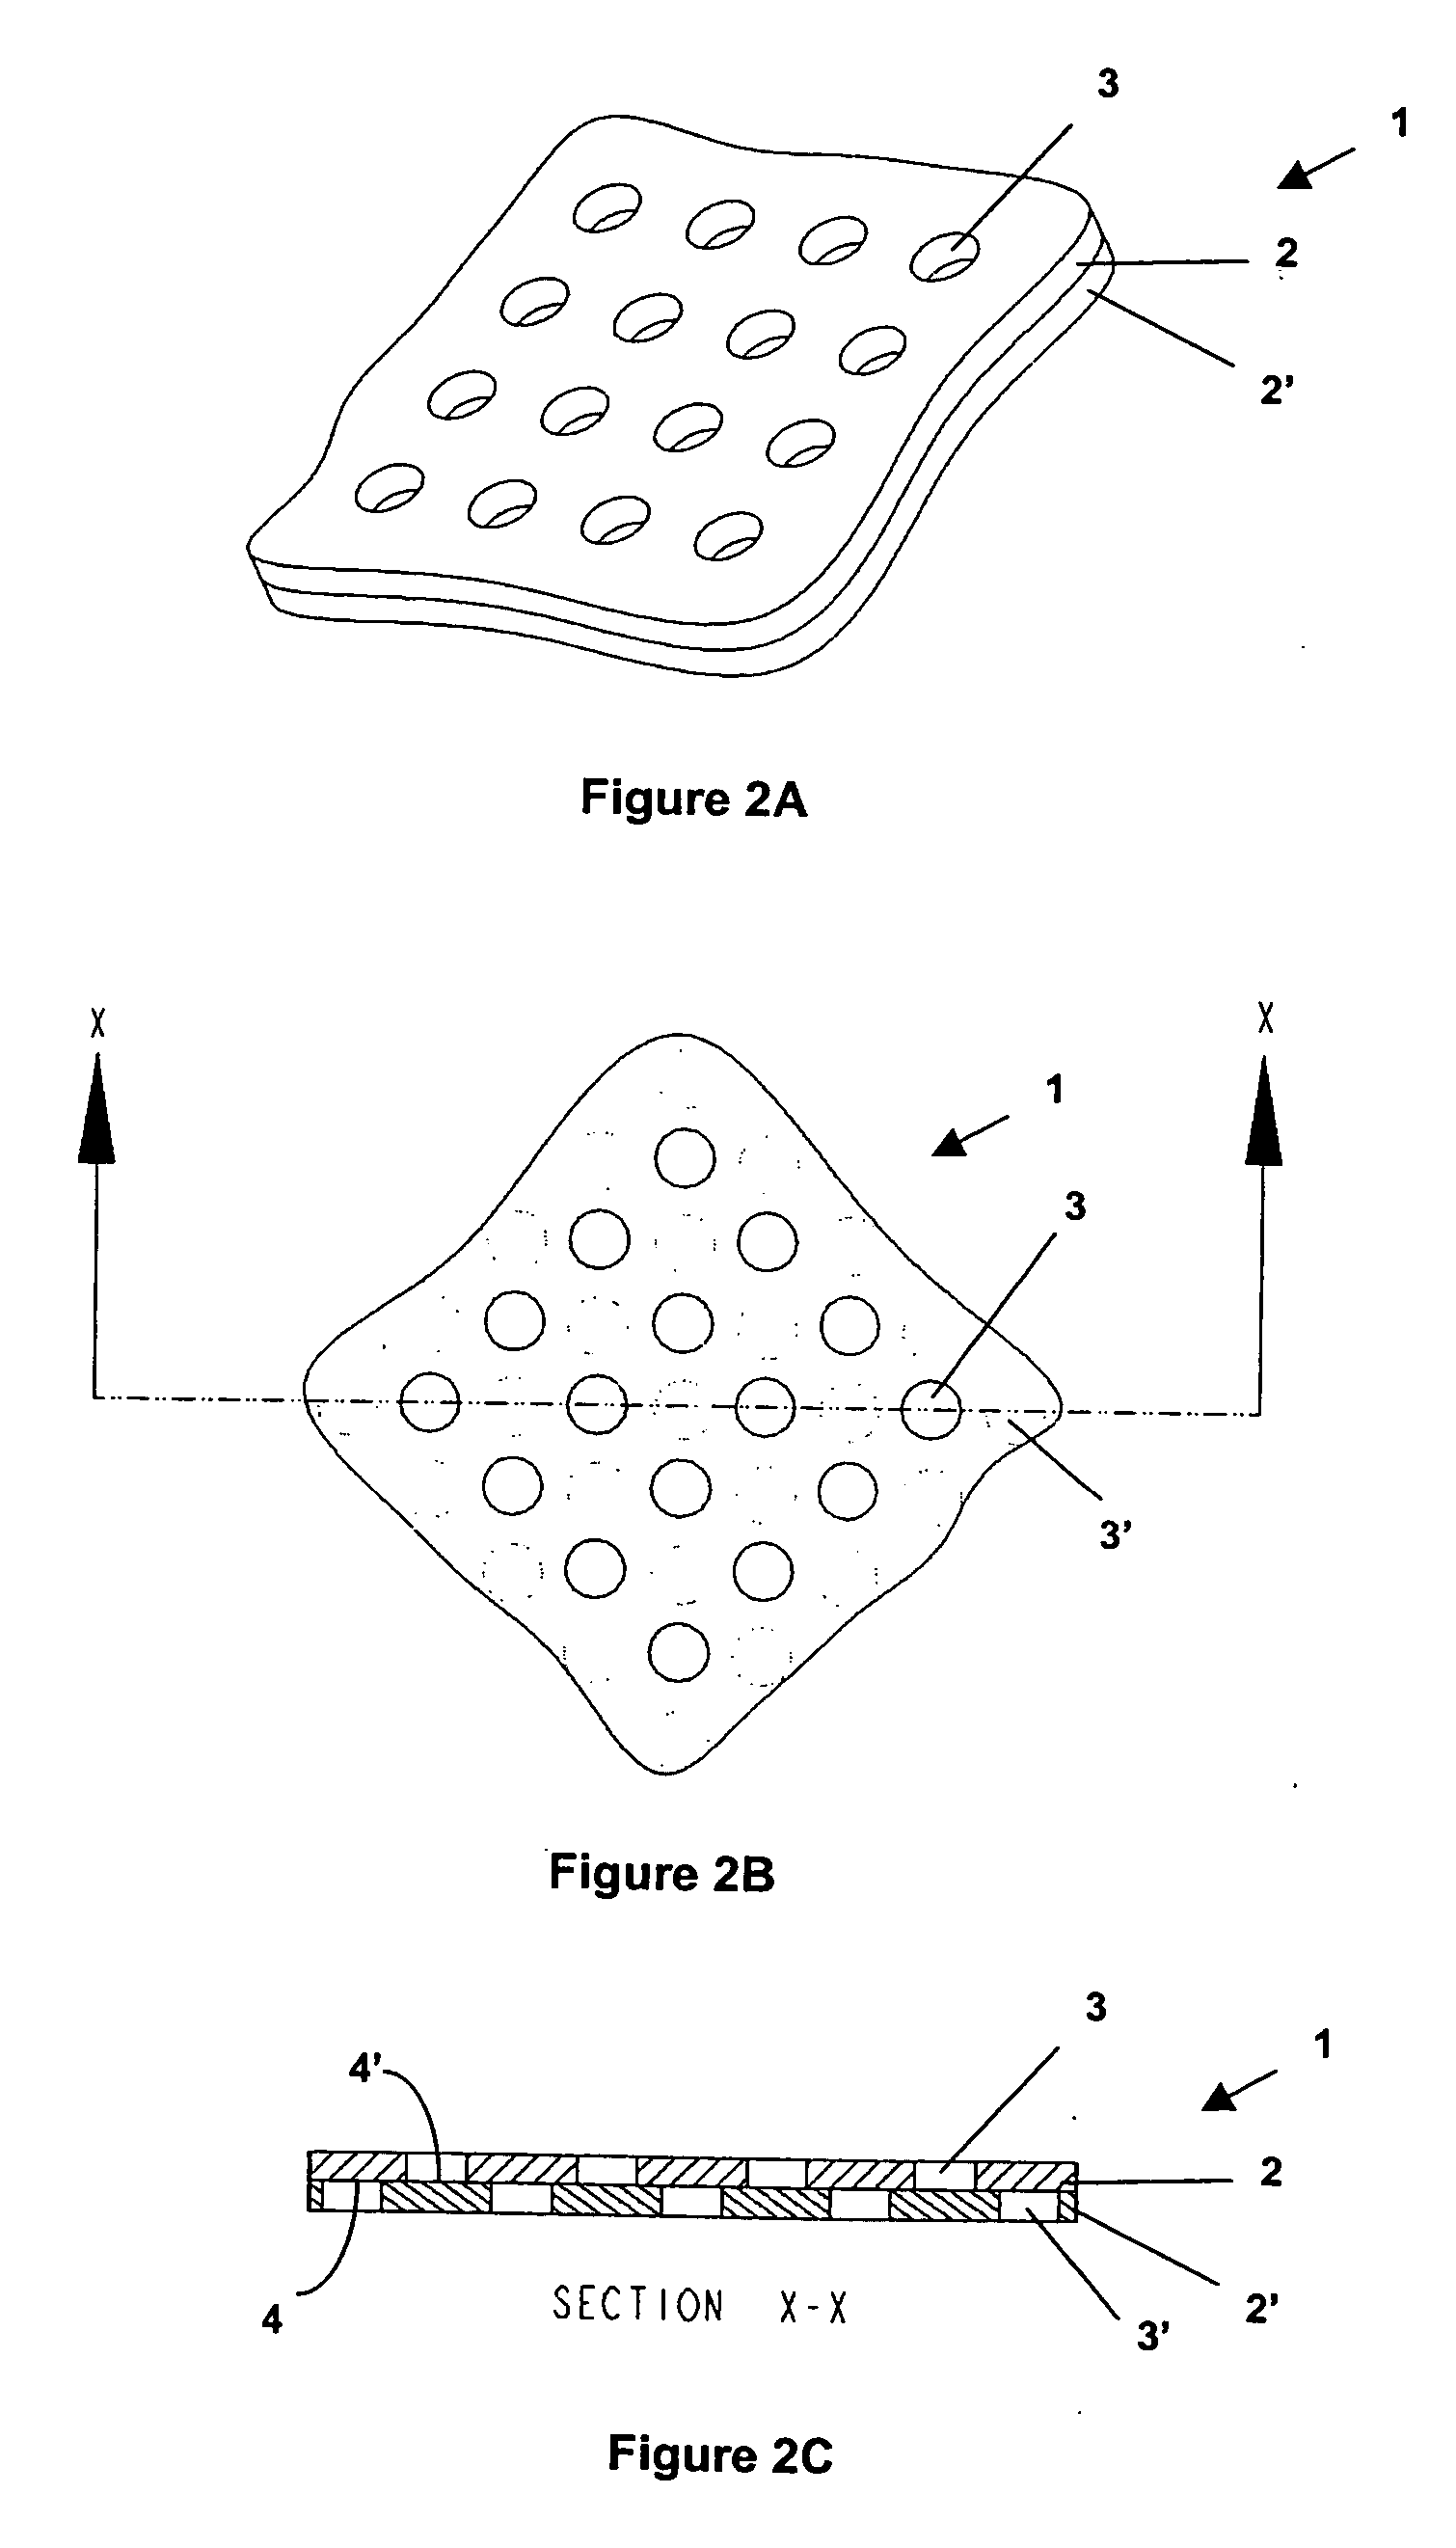 Adaptive membrane structure with insertable protrusions